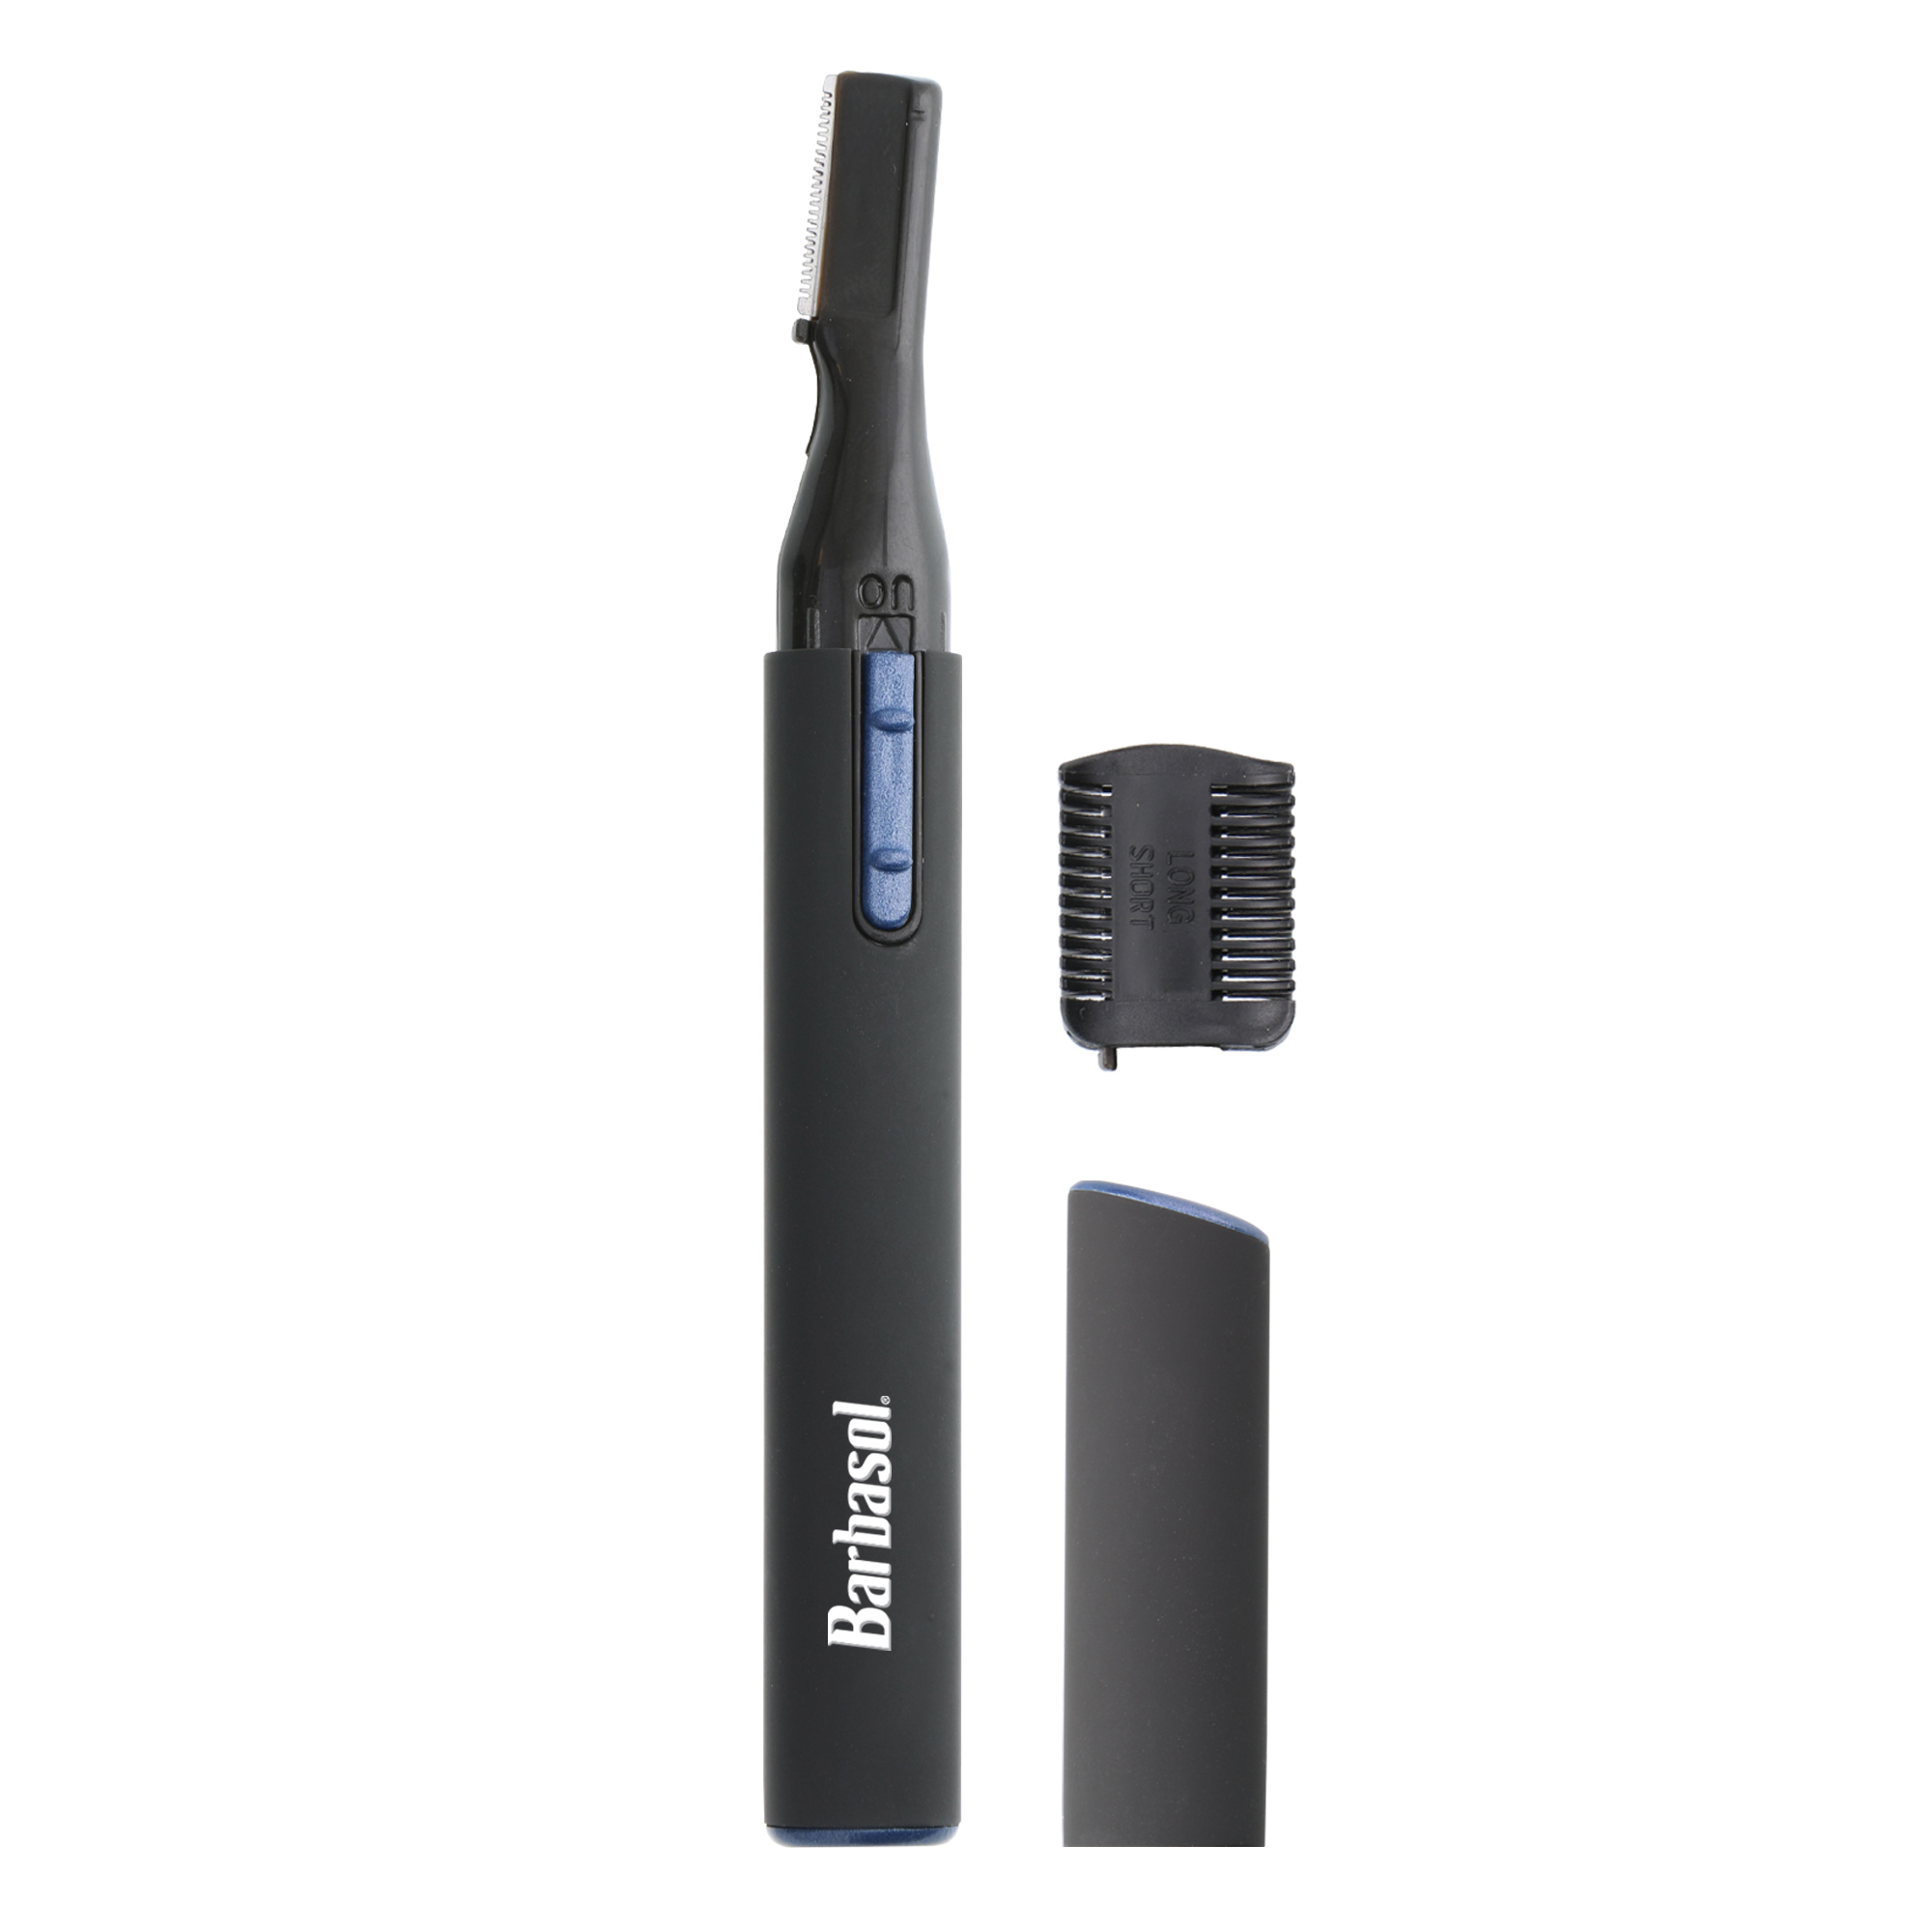 barbasol ear and nose trimmer reviews